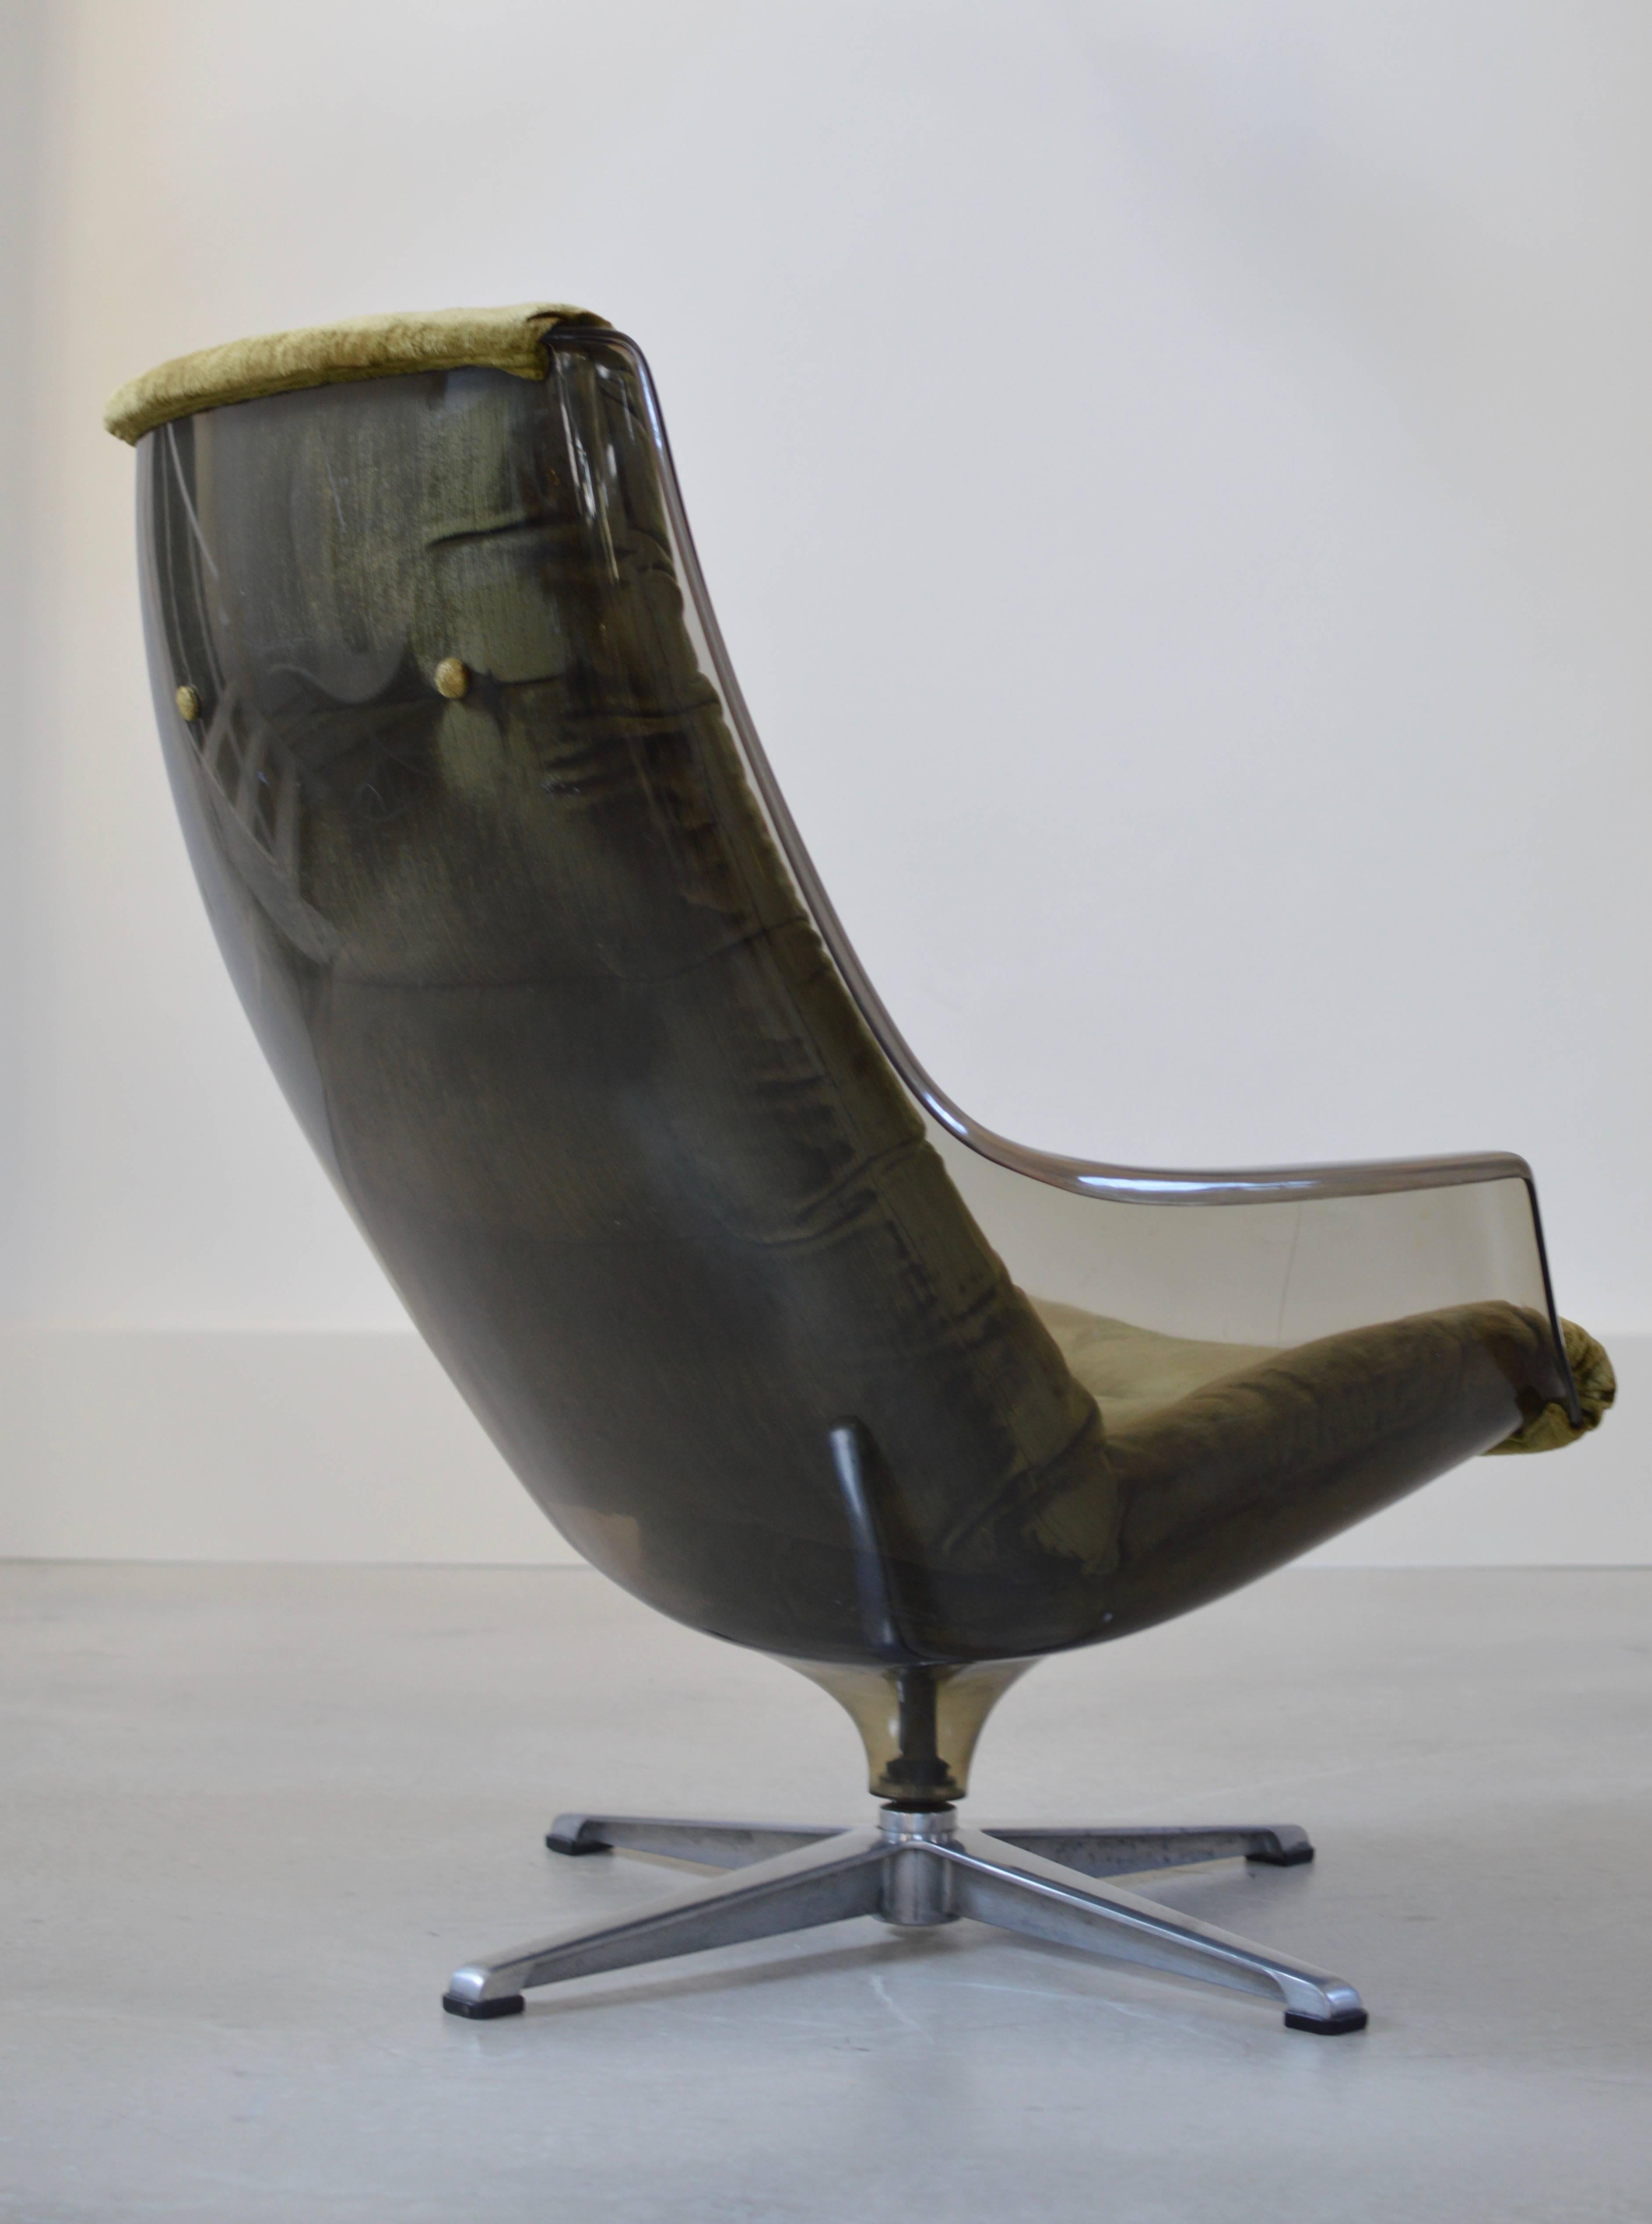 Galaxy chair (or 'Form 8′) by Swedish designers Alf Svensson & Yngmar Sandstön for DUX, Sweden, 1970s. 
Swivel chair on four star base, polyester shell with upholstered interior of green velours.